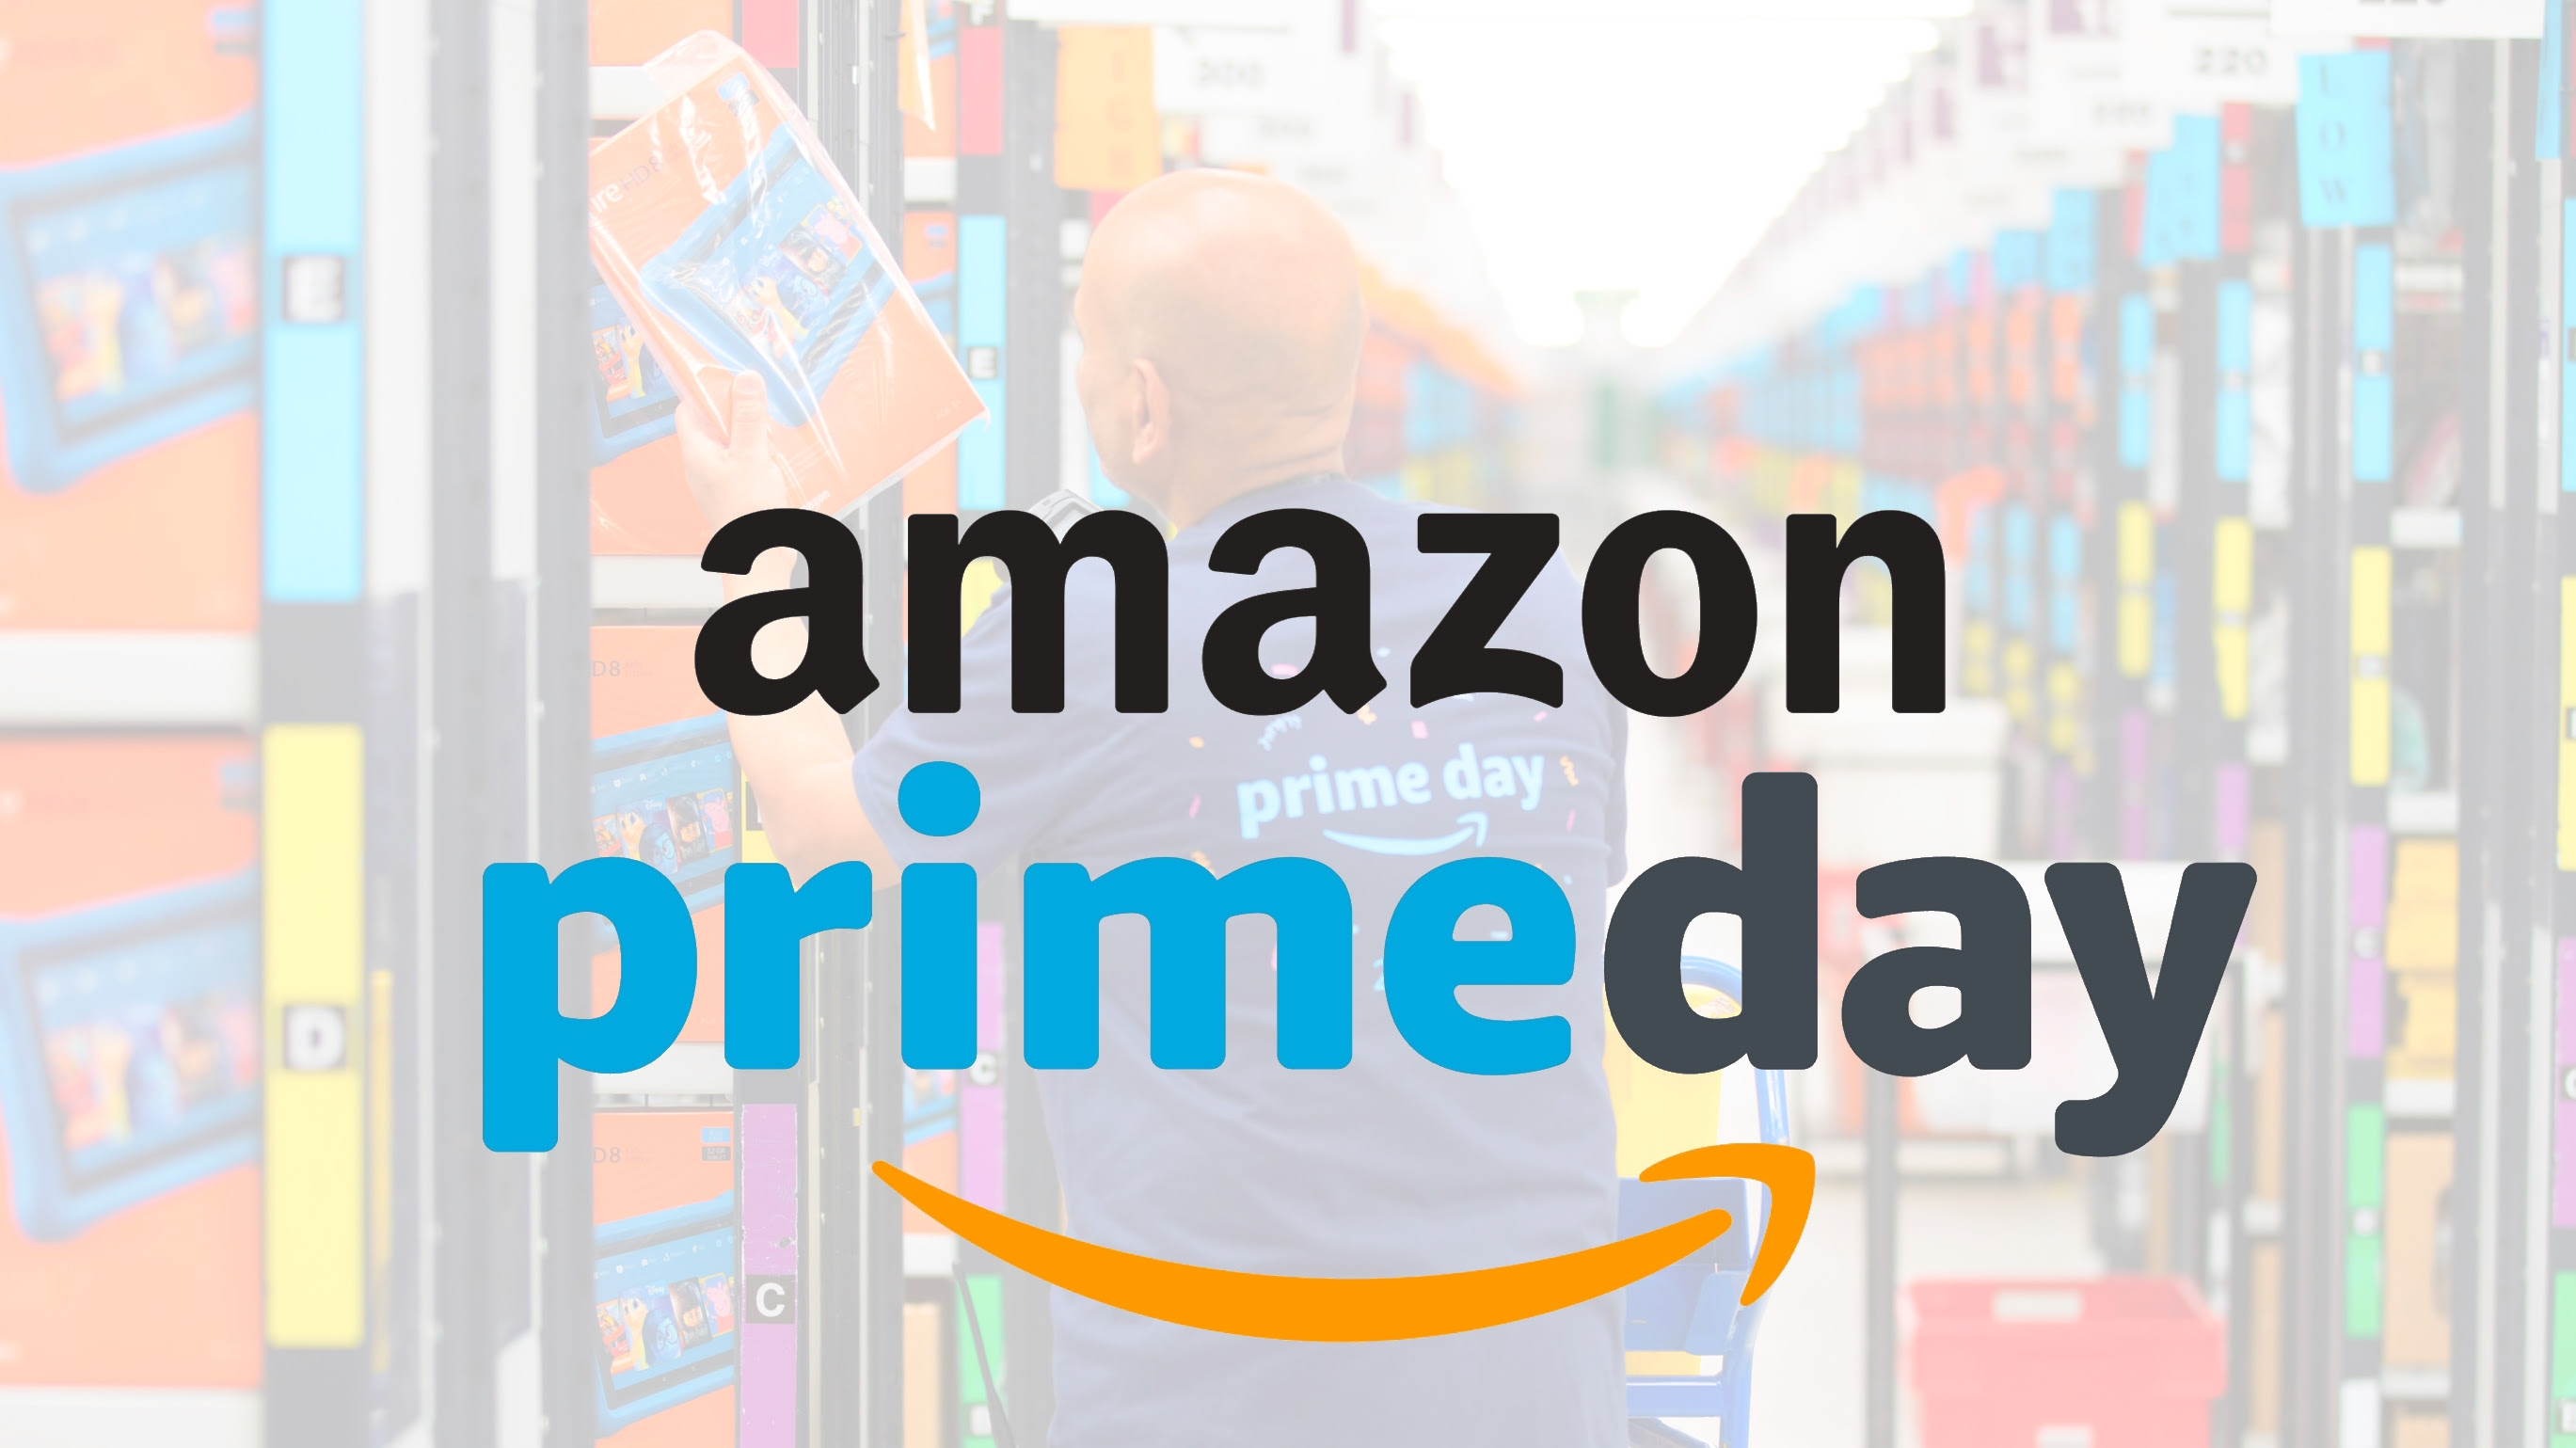 It's official - Amazon Prime Day is coming next month and there are deals to shop now